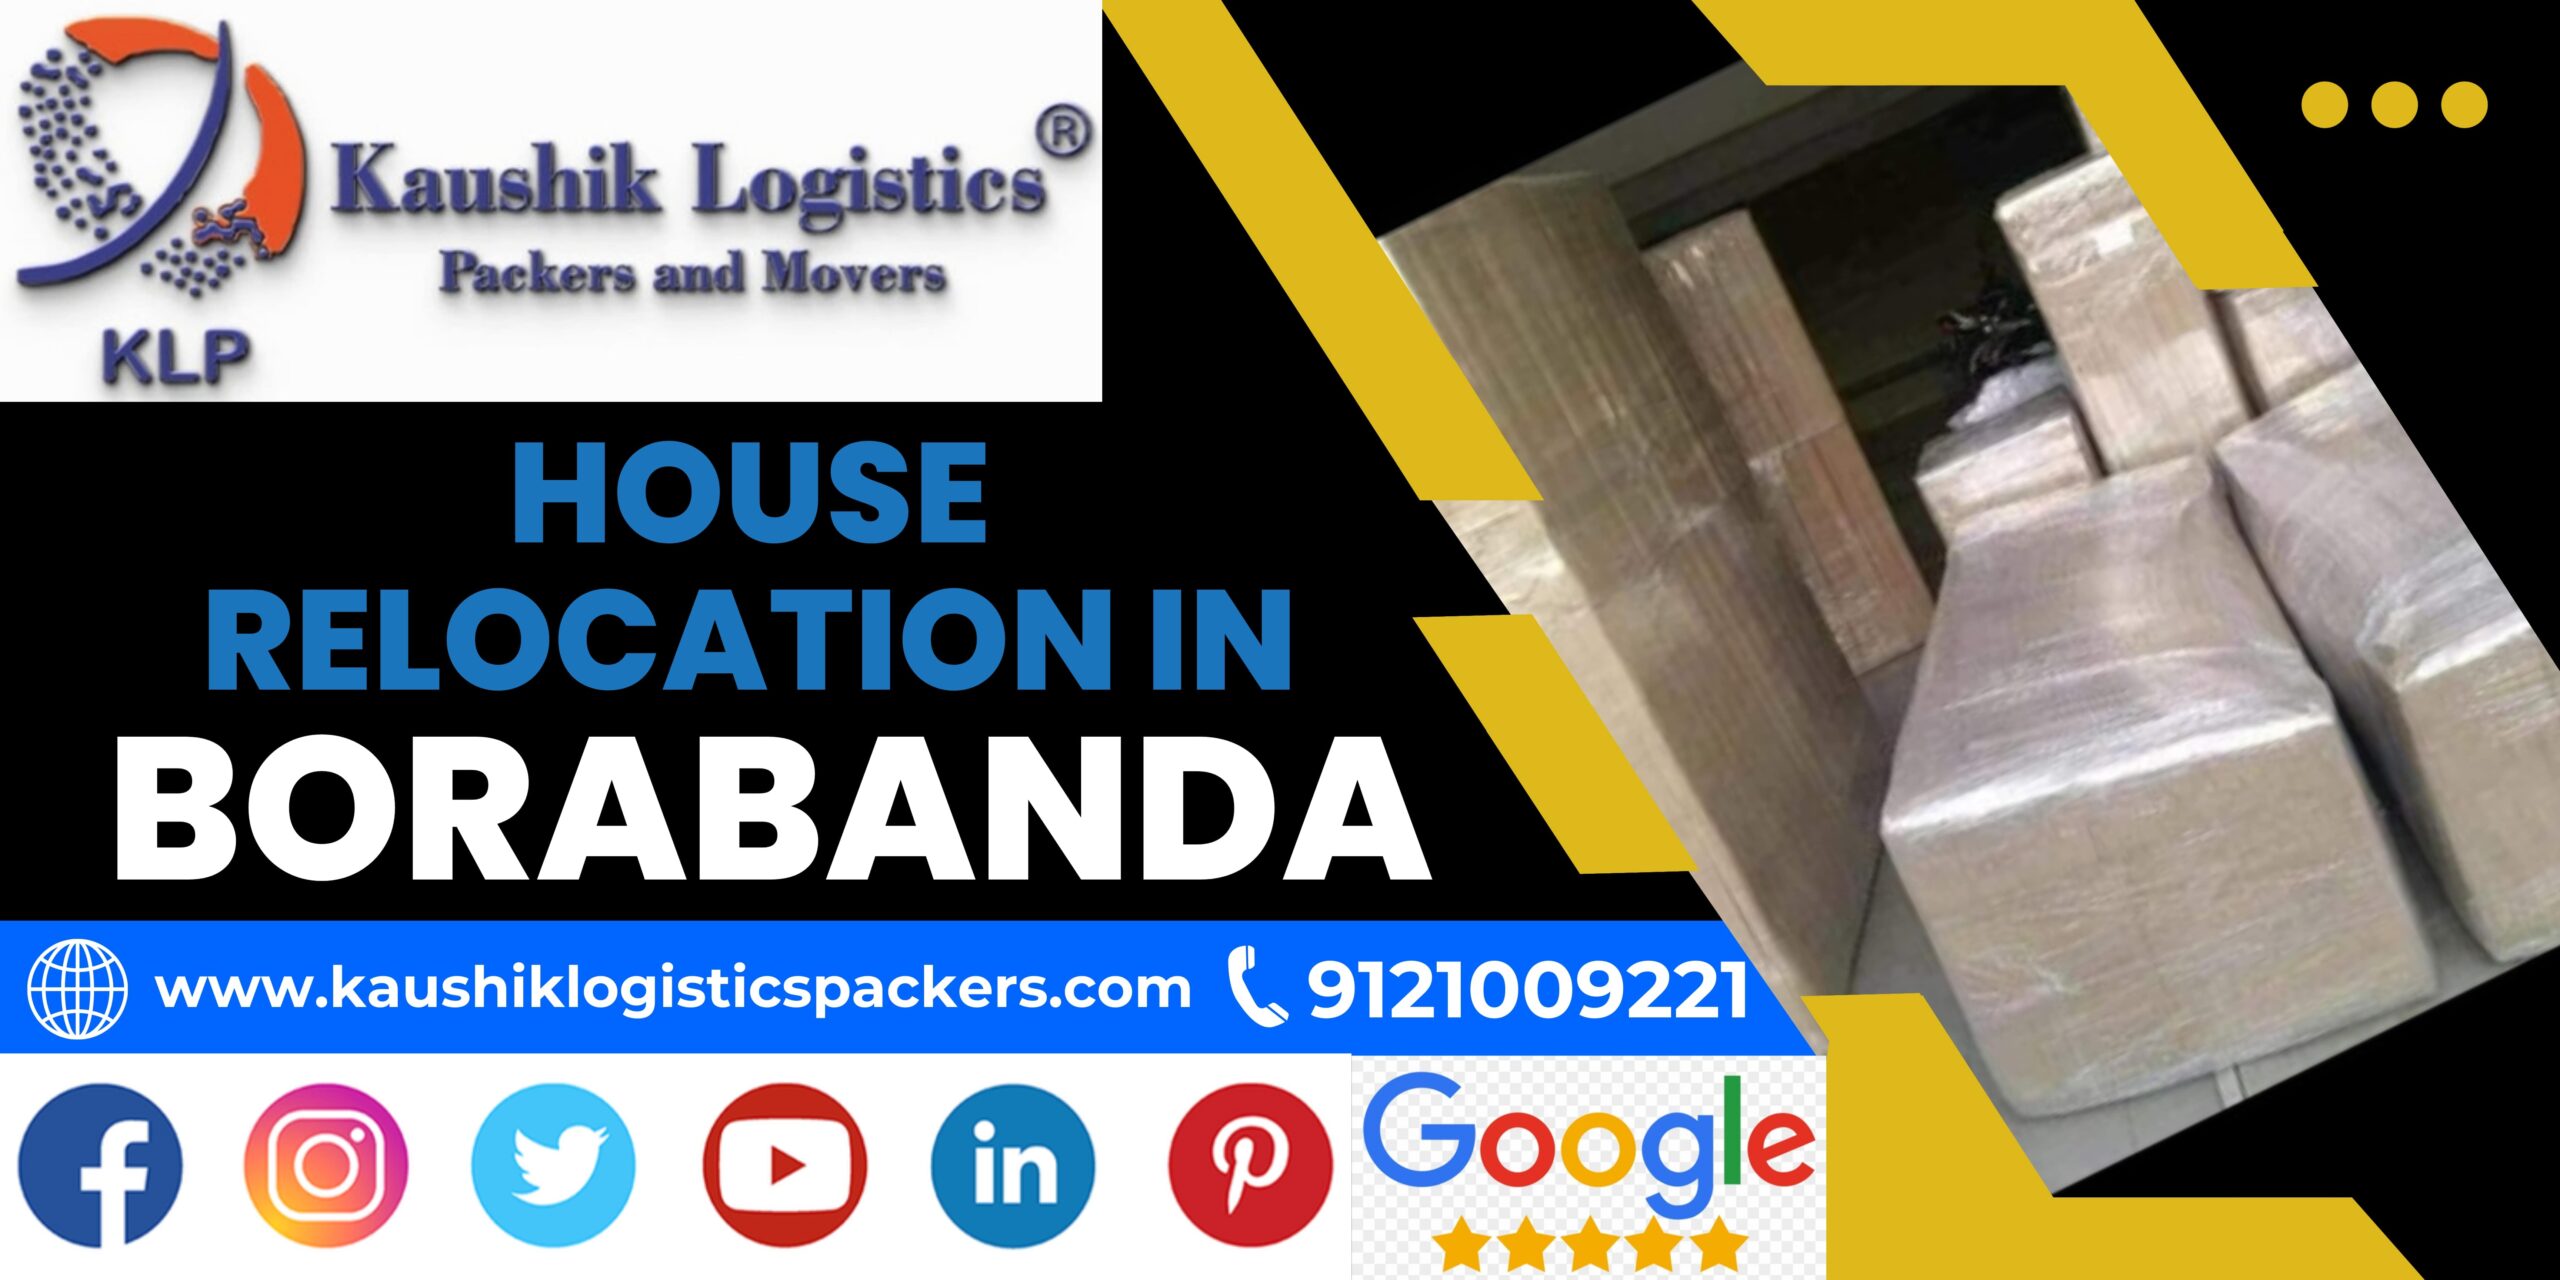 Packers and Movers In Borabanda